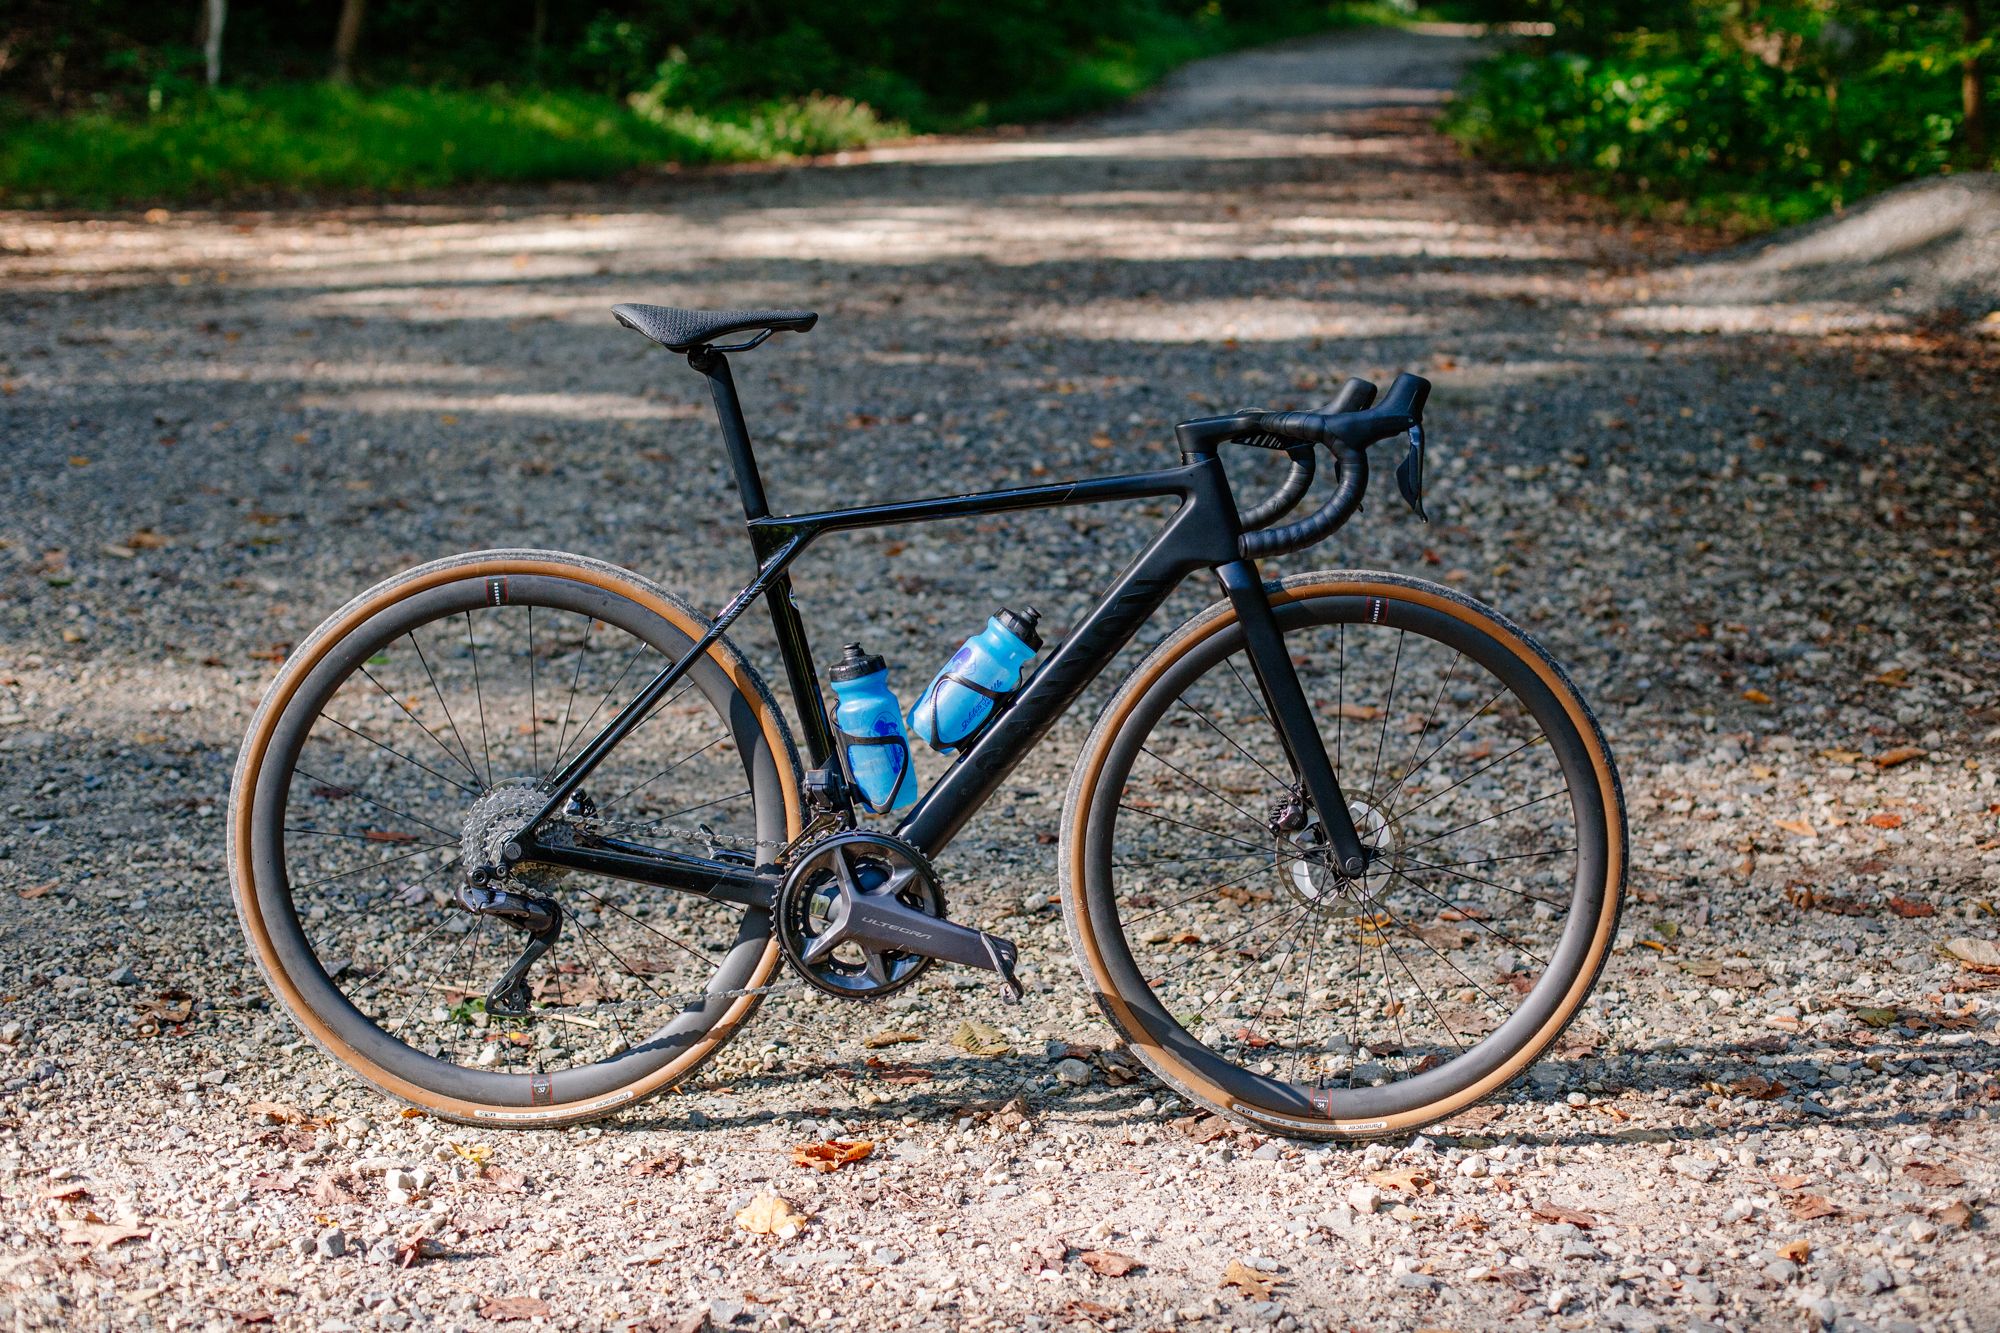 The Canyon Ultimate CFR might be designed for the road, but it can be equipped for gravel as well. This Canyon Ultimate is currently being put through the road and gravel paces by Bicycling’s gear testers. (Dan Chabanov)